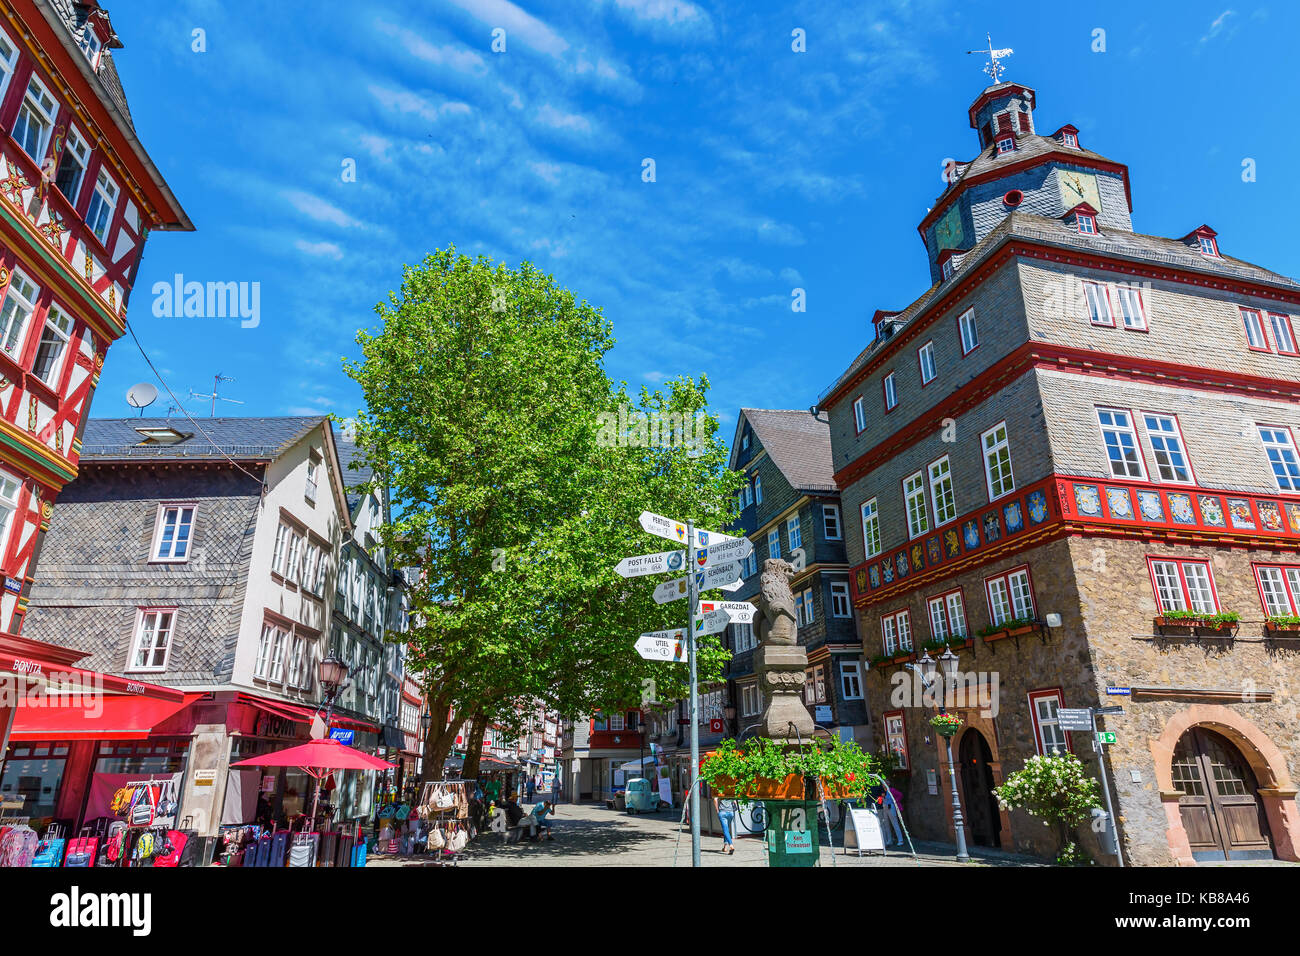 Herborn, Germany - June 10, 2016: square in the old town of Herborn with unidentified people. Herborn is a historic town on Dill in Hesse, scenic attr Stock Photo